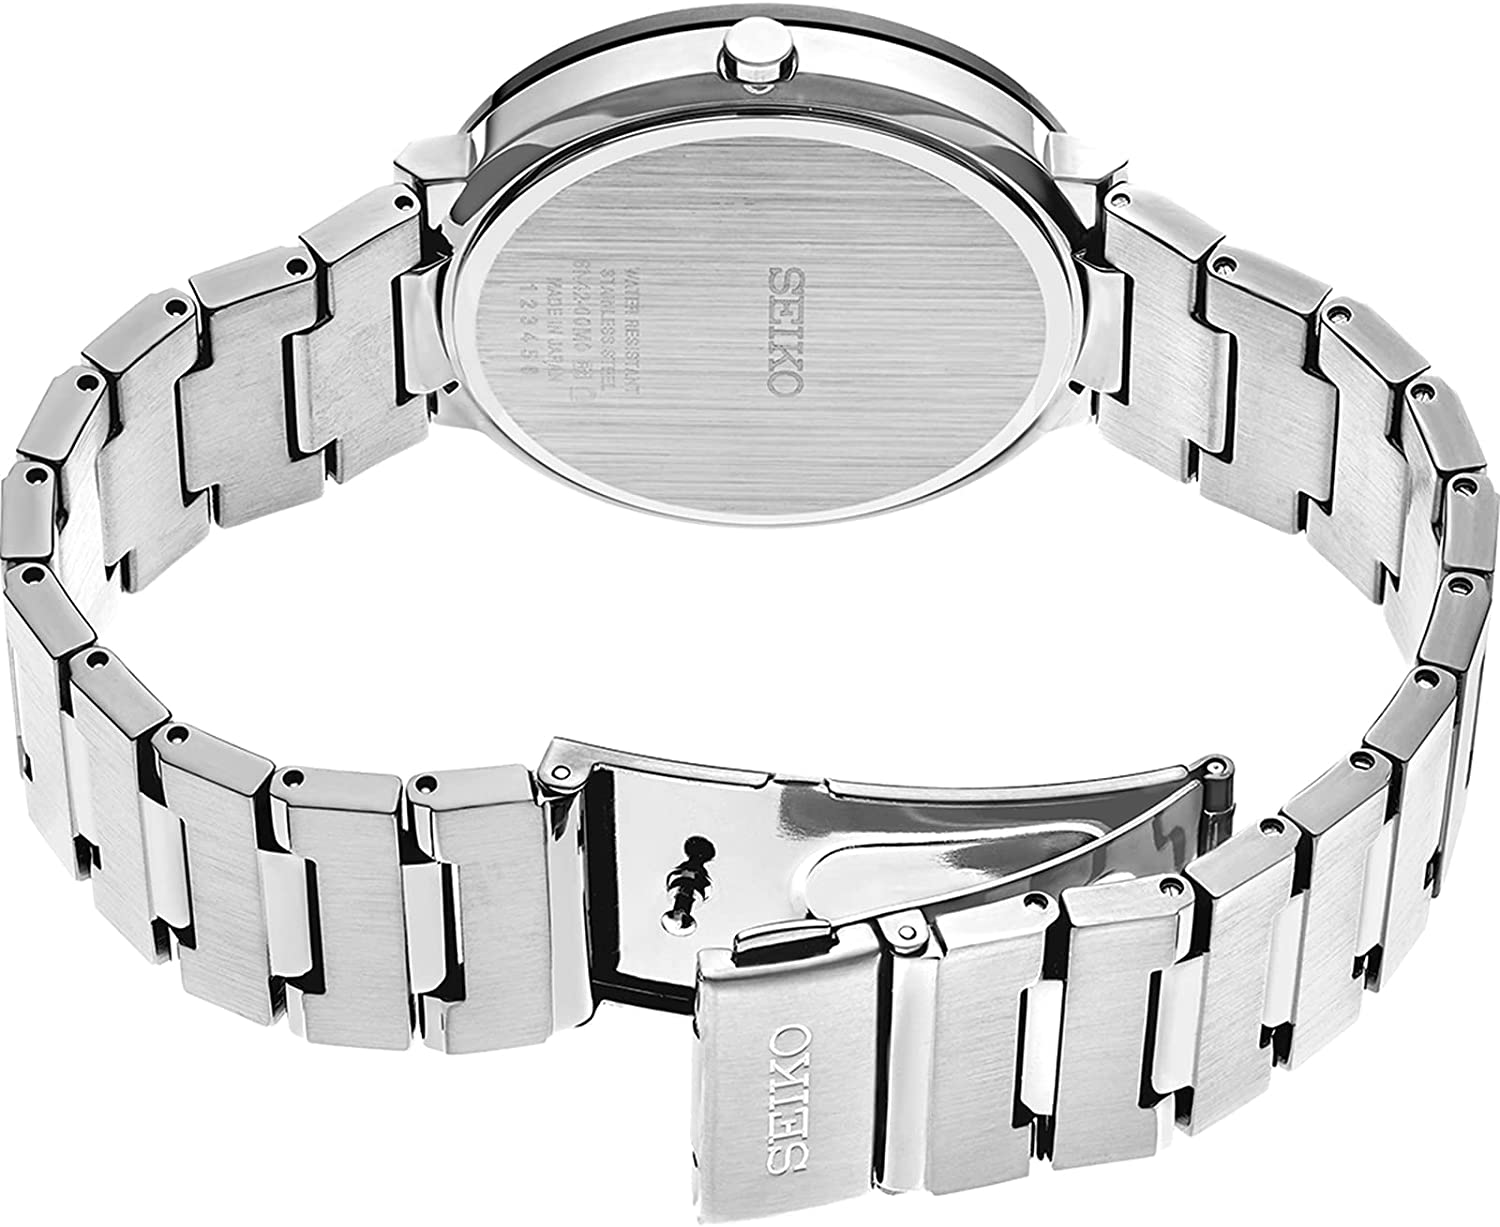 Seiko Men S Japanese Quartz Dress Watch With Stainless Steel Strap Si Prime Time Shop